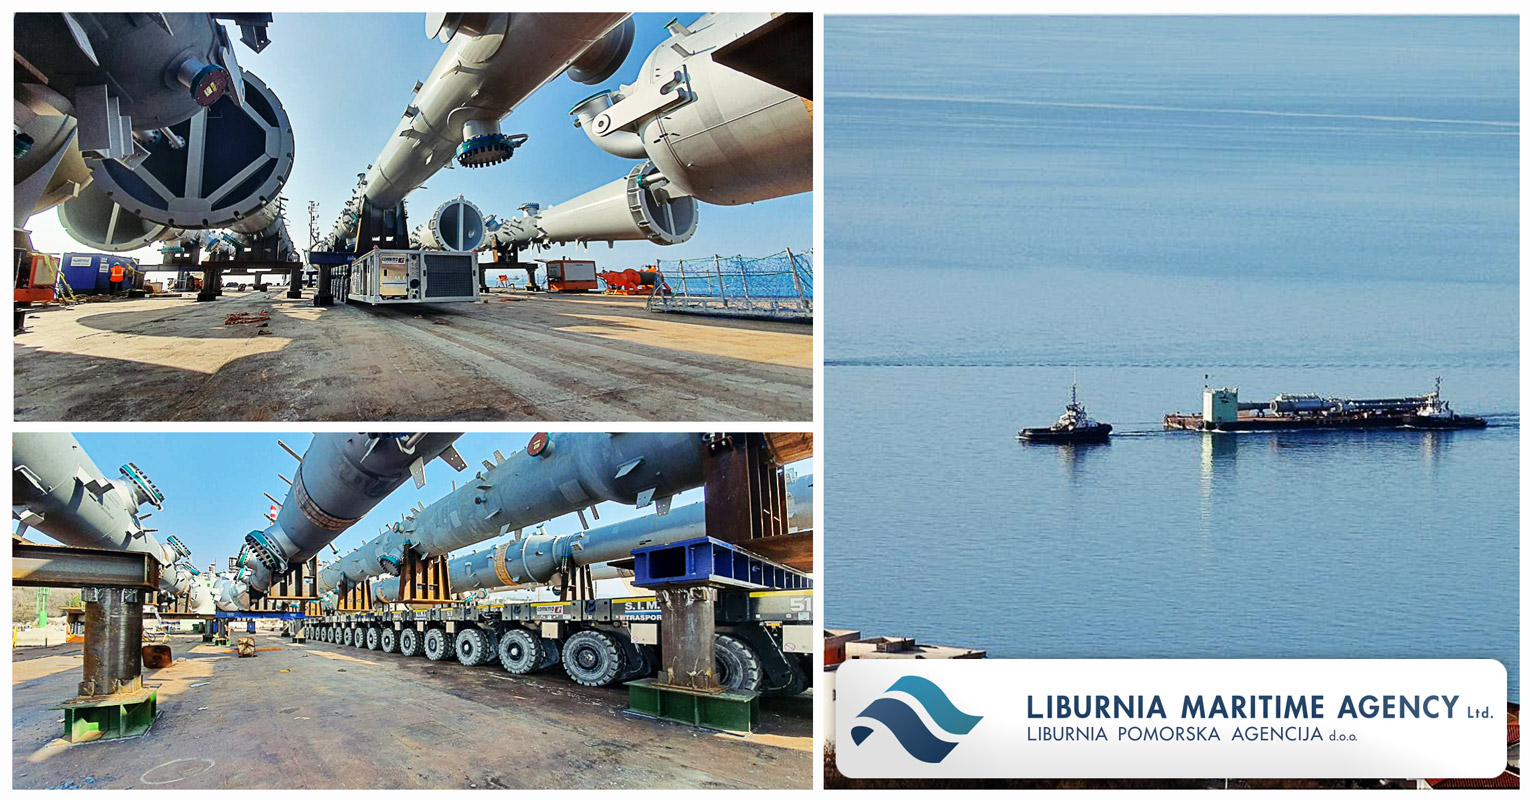 Liburnia is Coordinating the Delivery of the Components for the New Delayed Coke Furnace at Rijeka Refinery